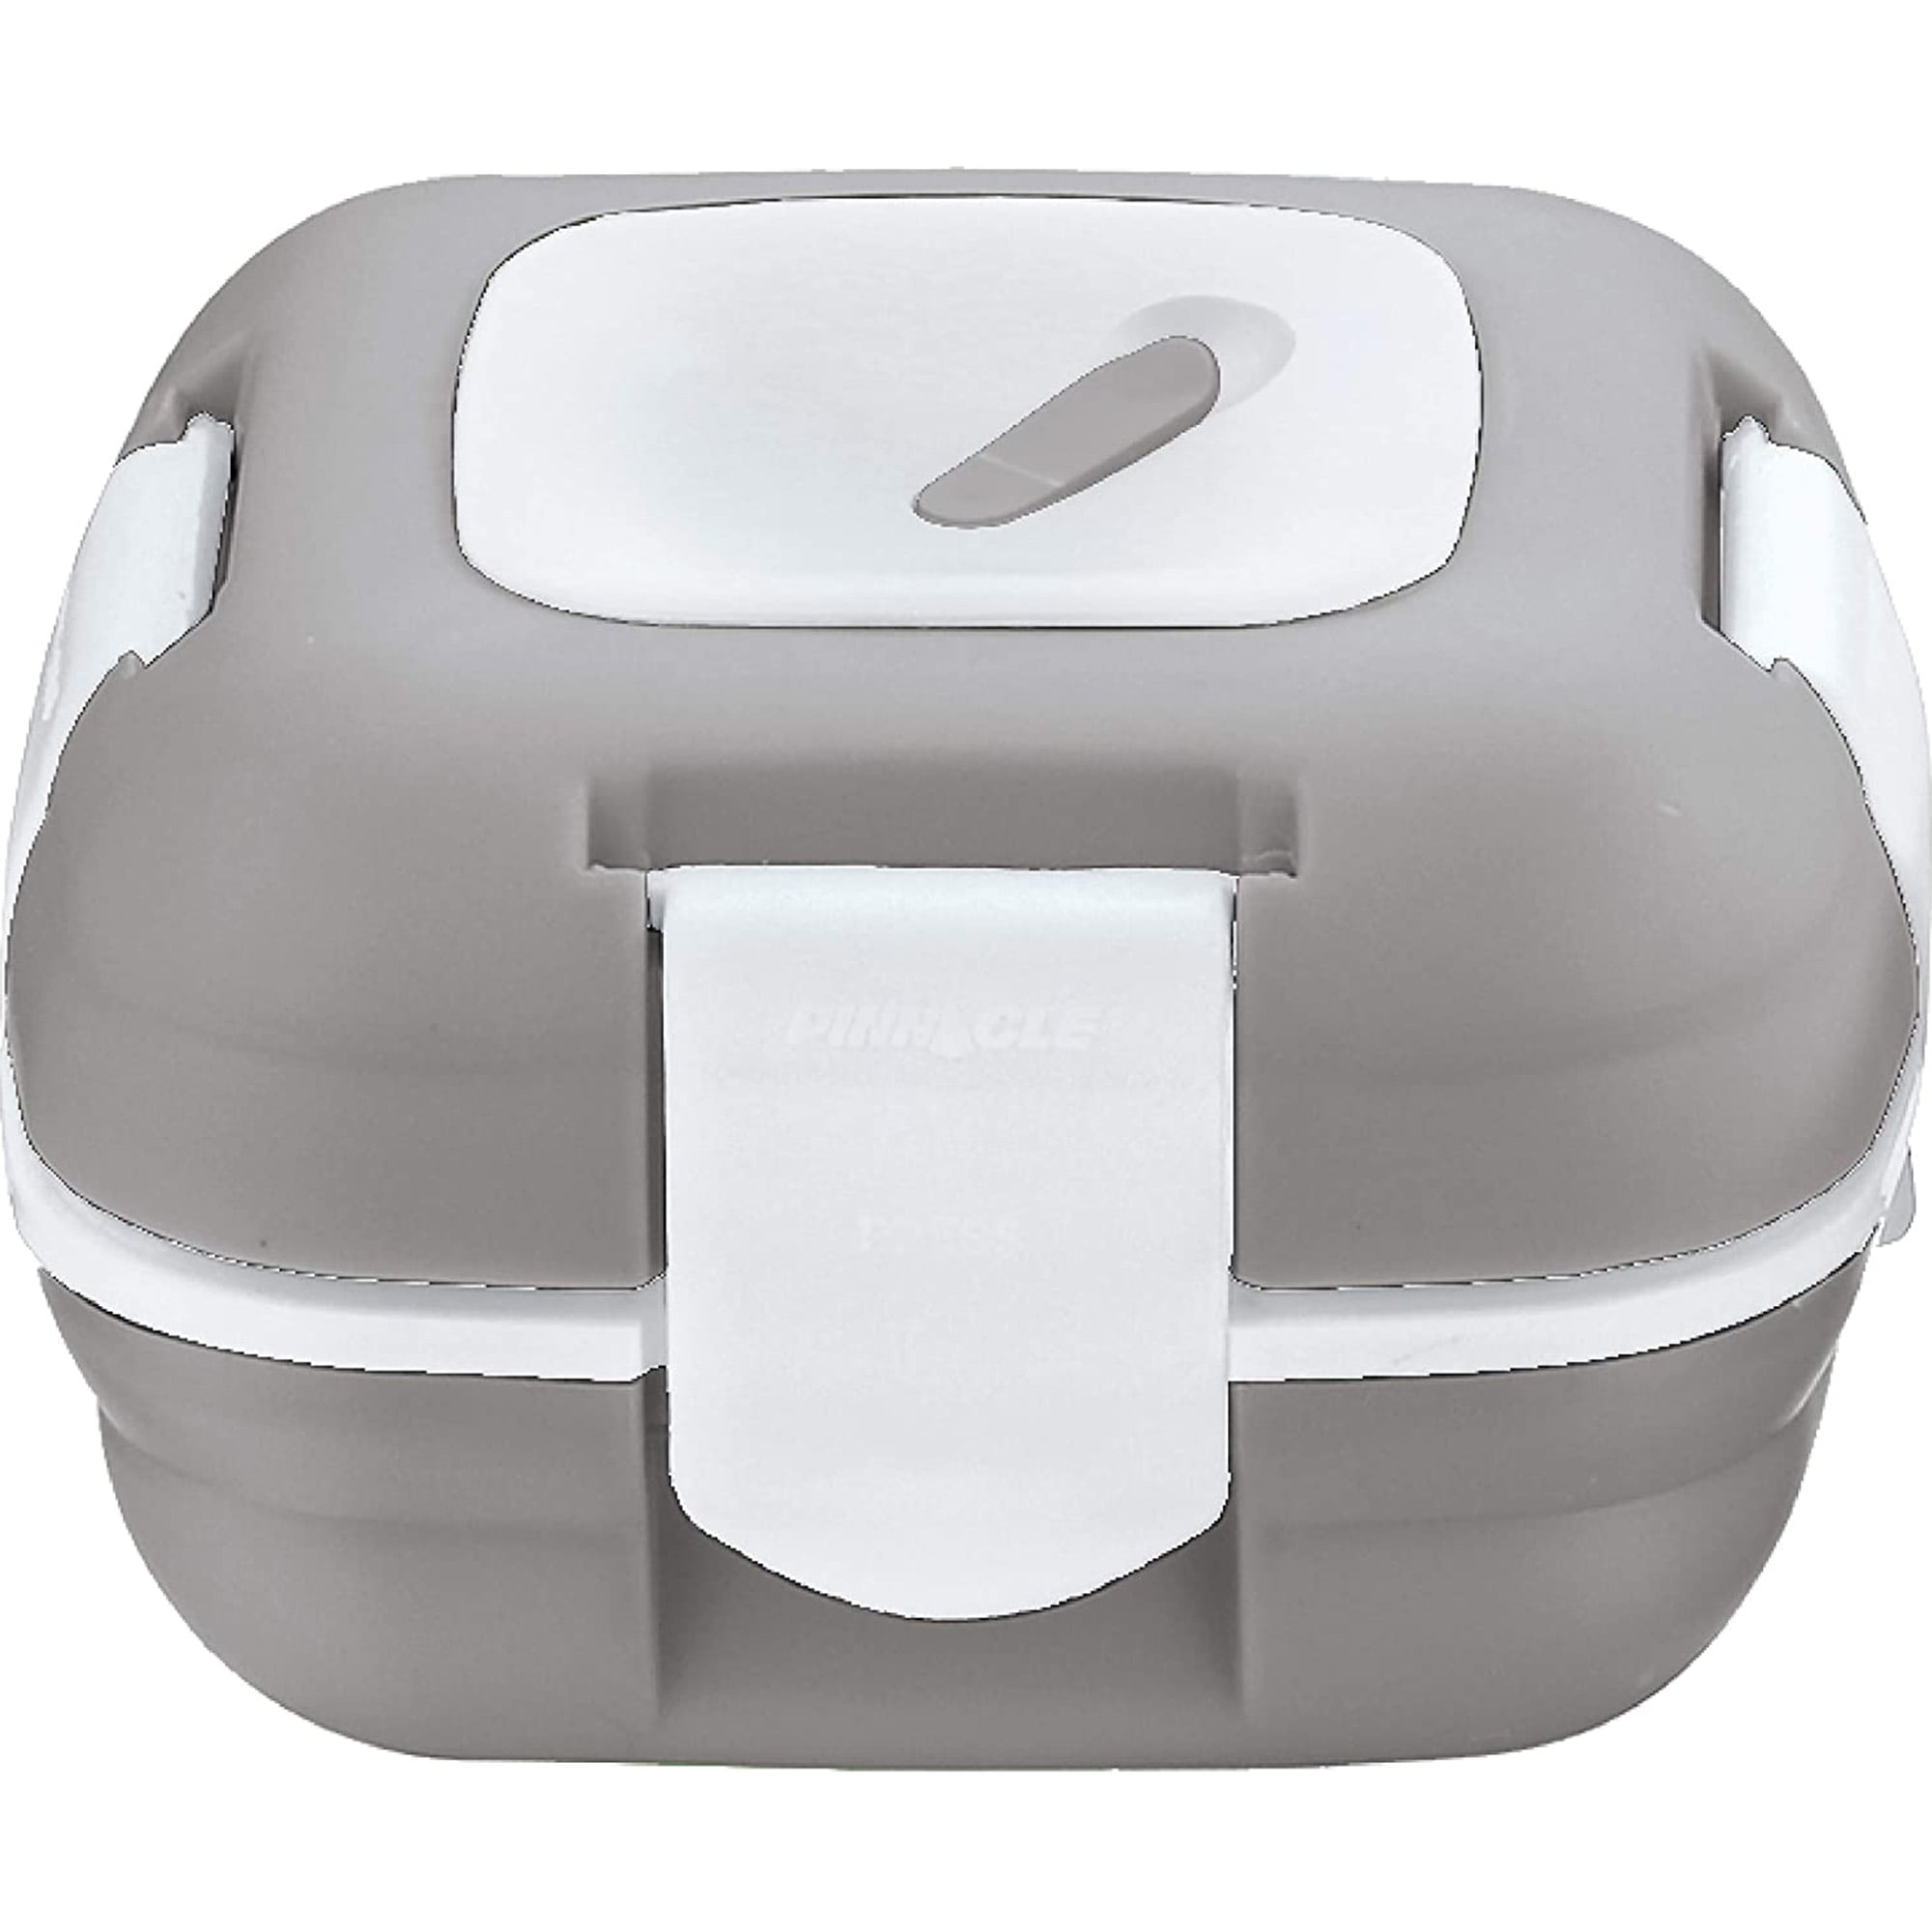 Buy Pinnacle Paloma Thermoware Insulated Lunch Box with Bag Bottle